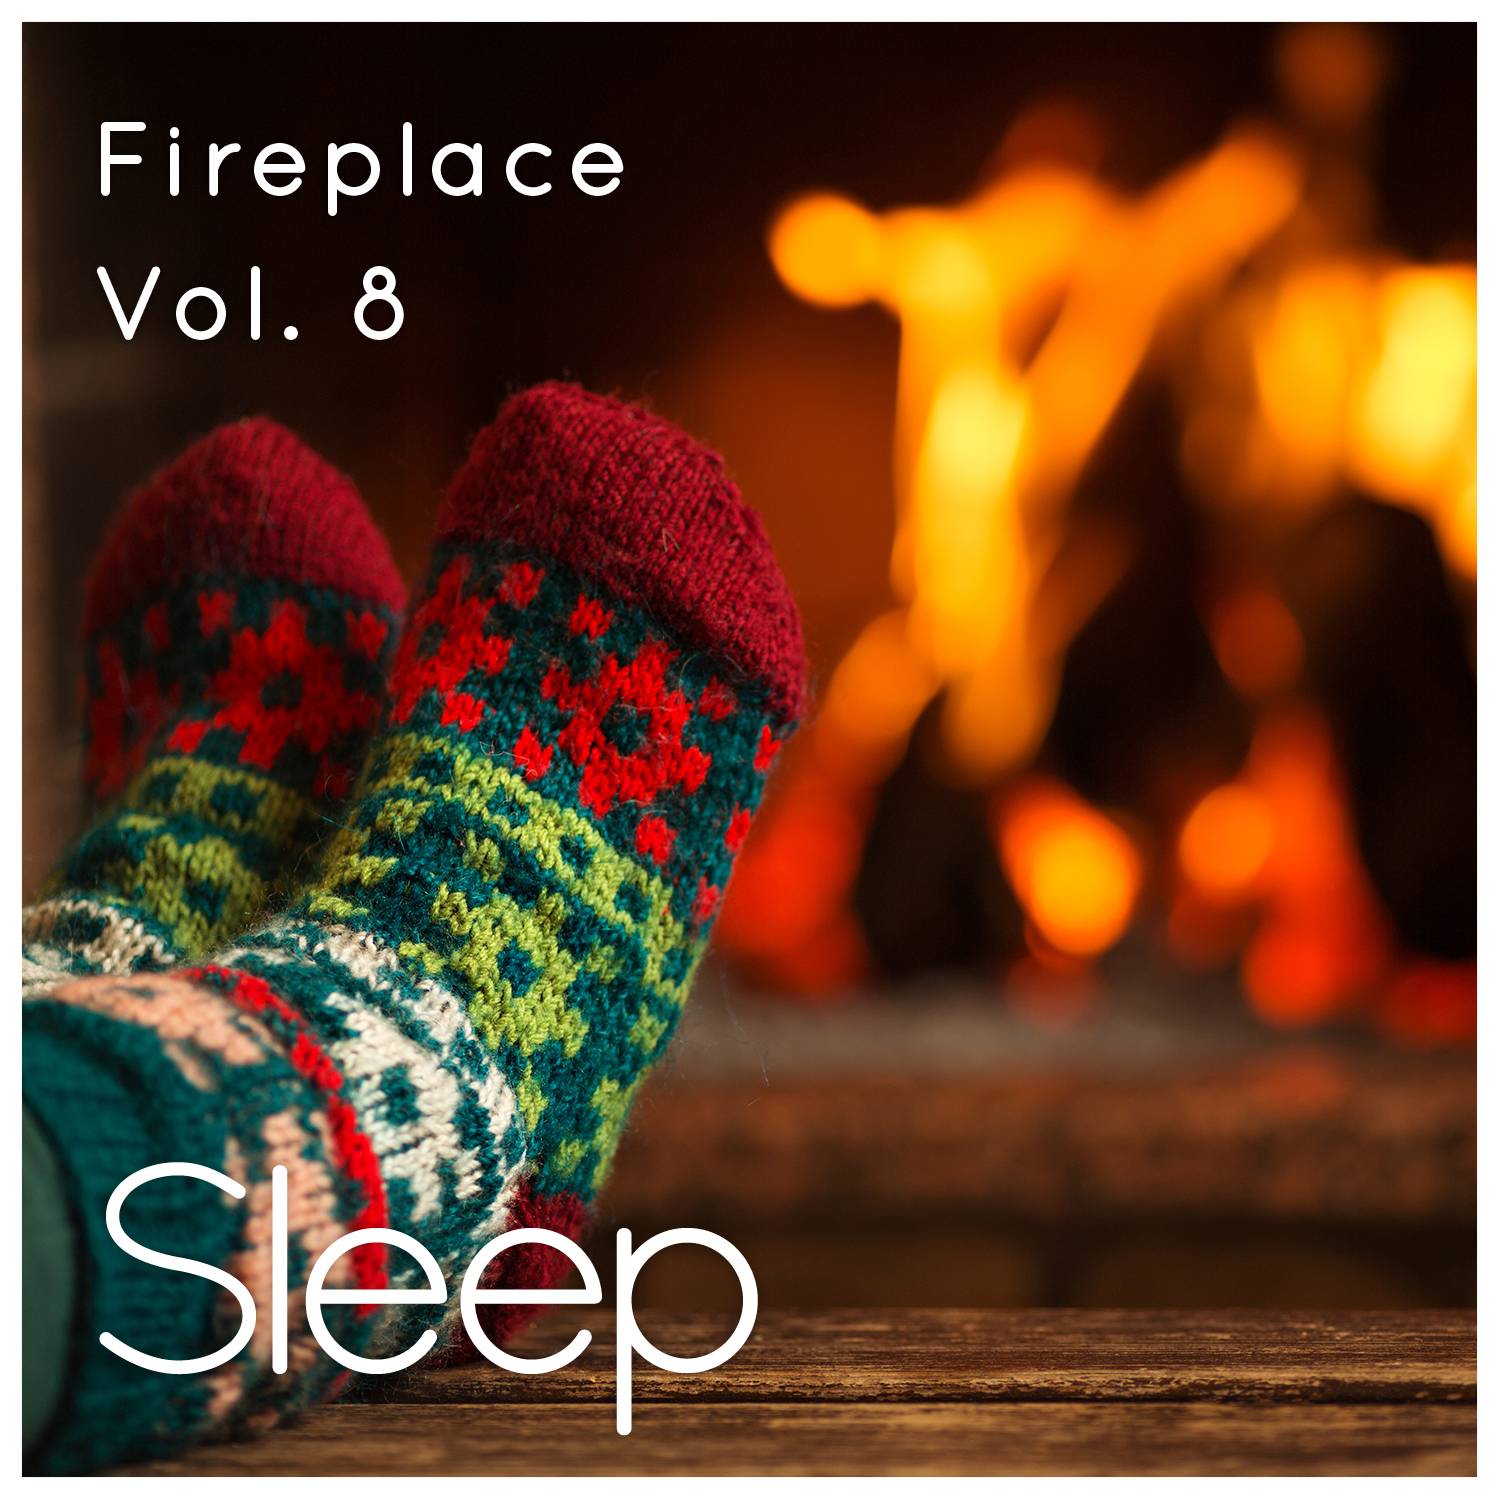 Sleep by Fireplace in Cabin, Vol. 8